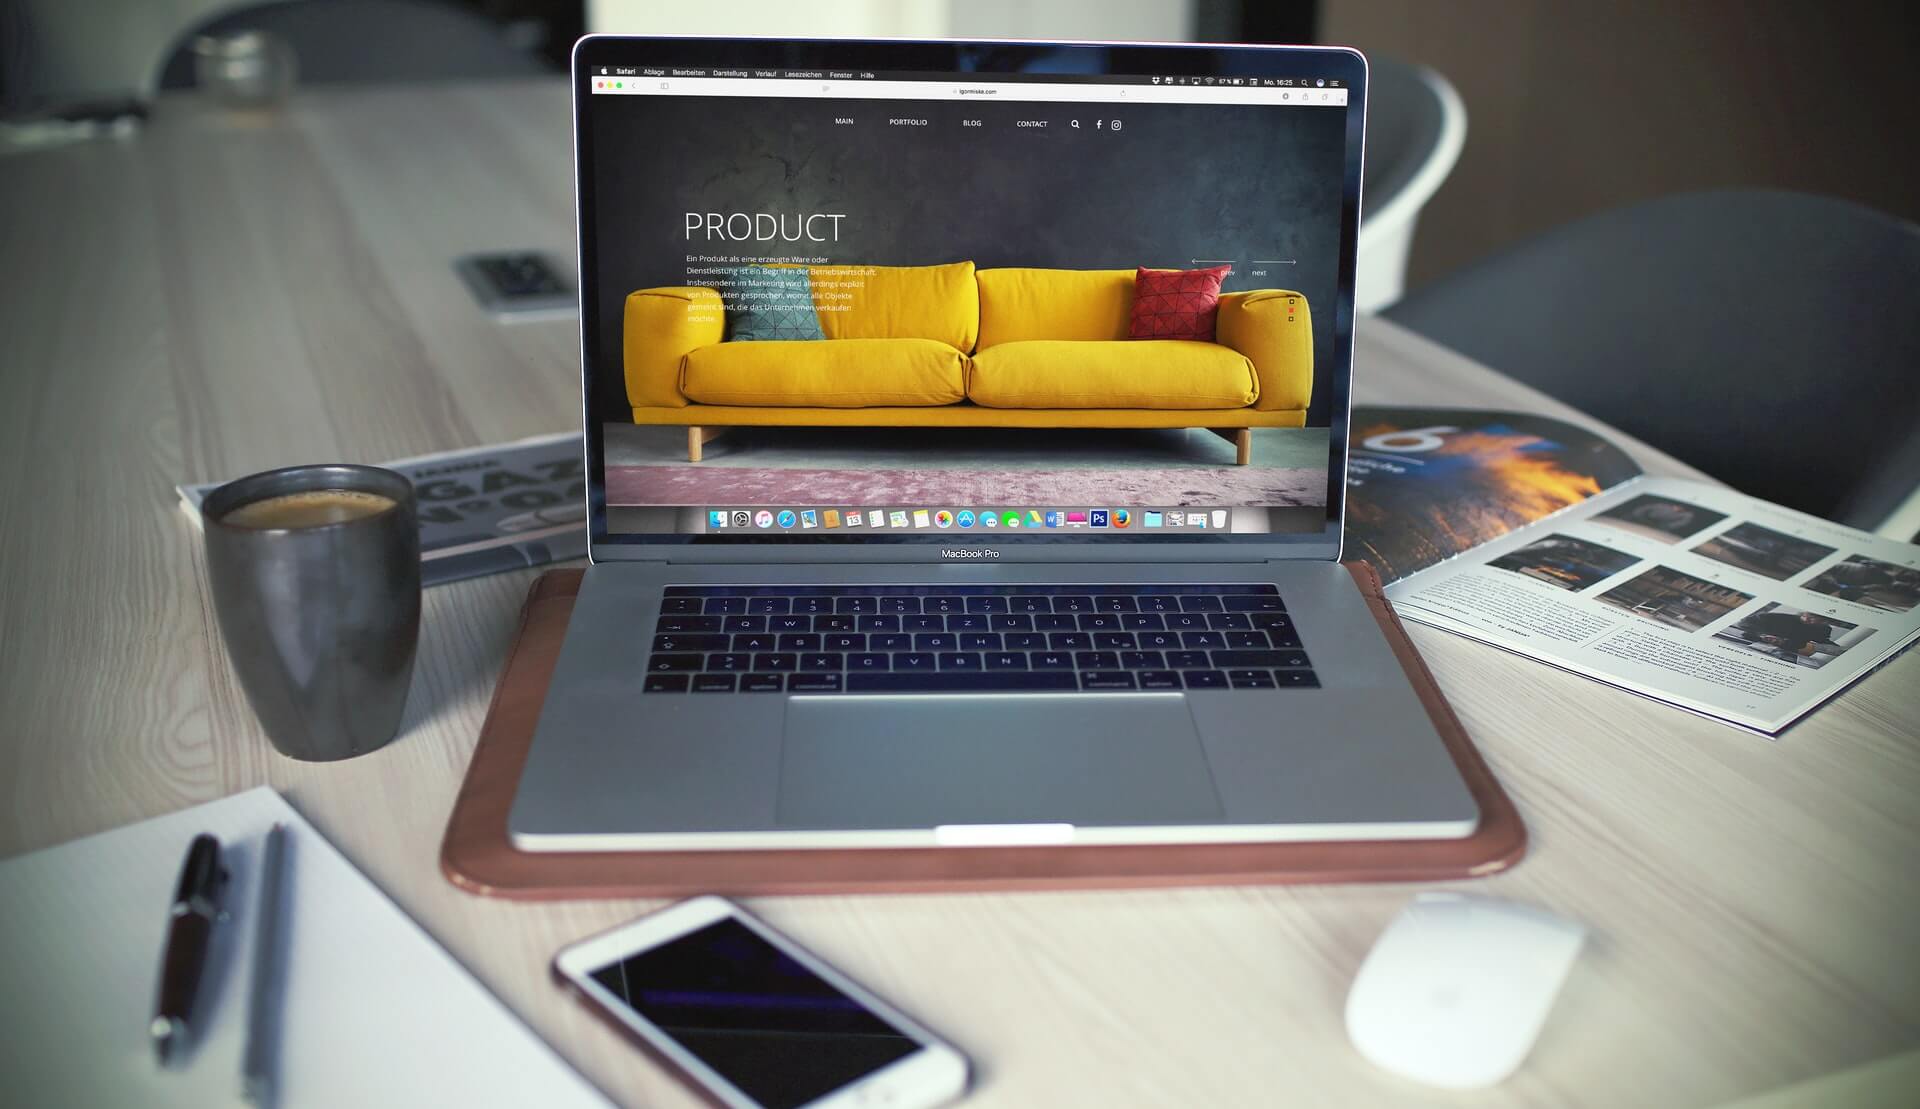 4 Tips to Make an Ecommerce Product Page Stand Out